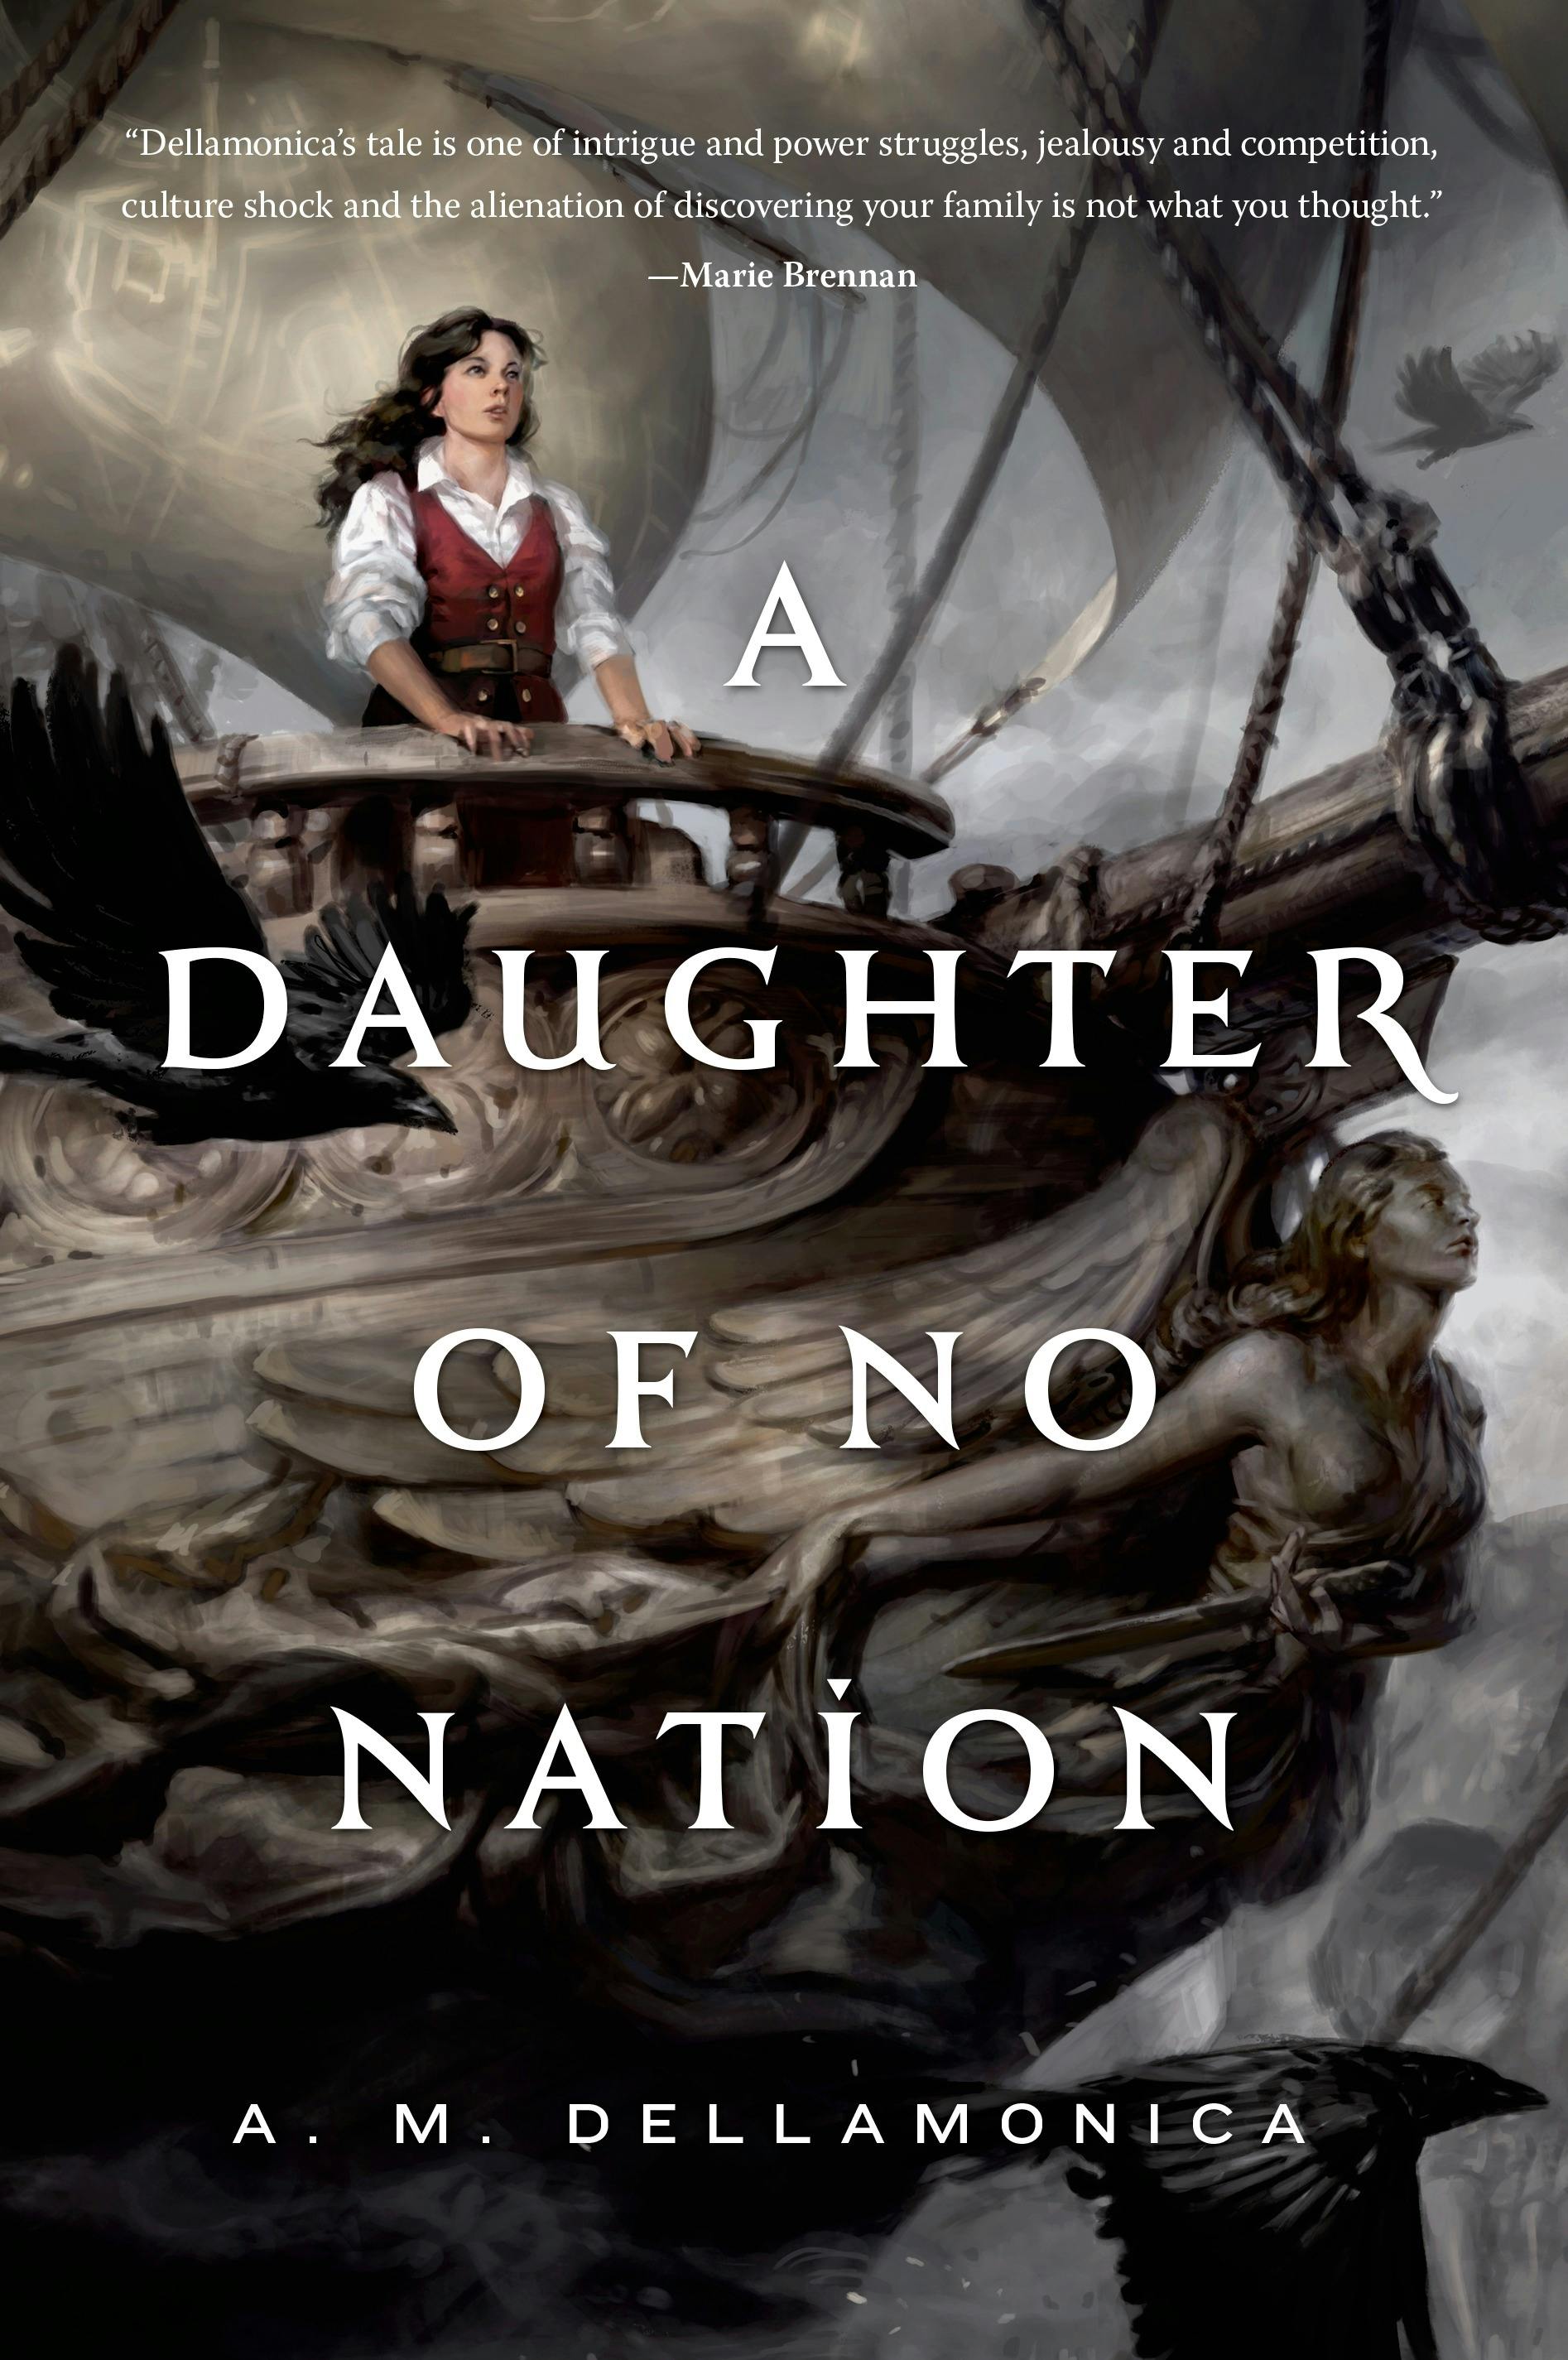 Daughter of No Nation